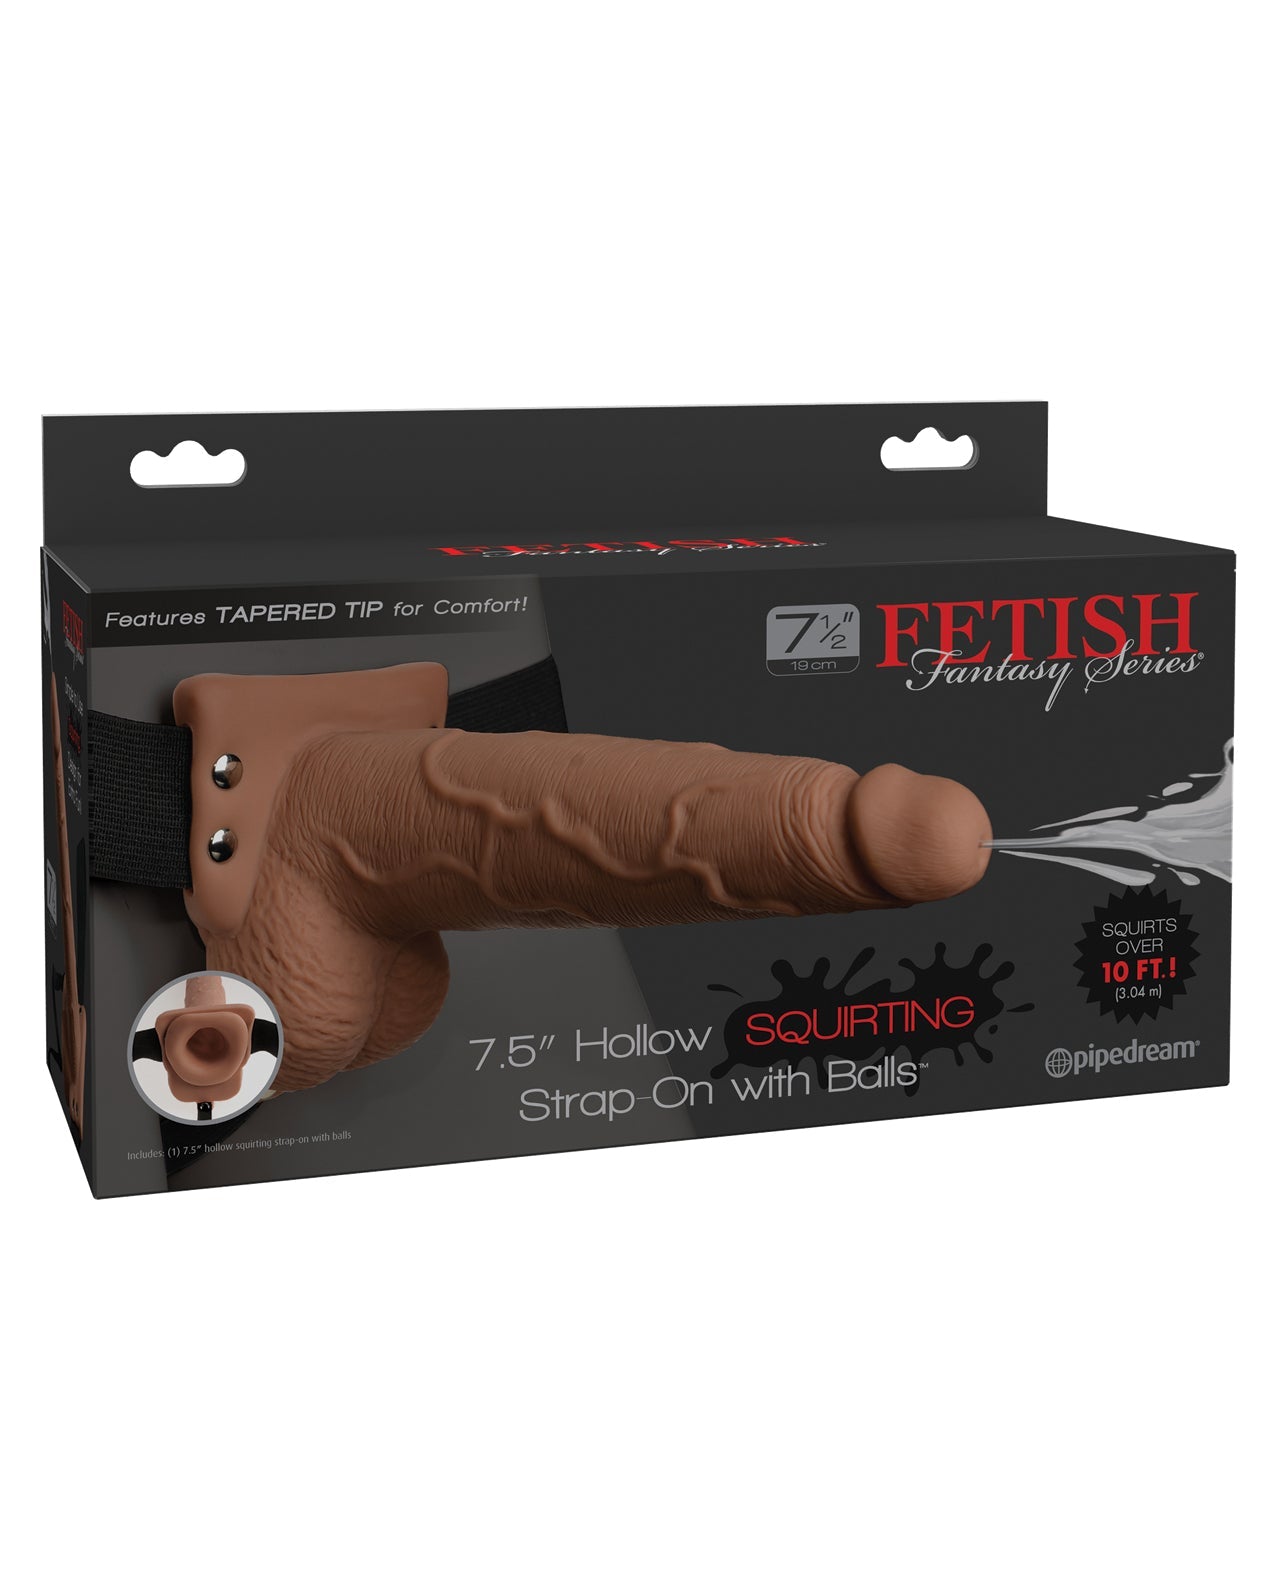 Fetish Fantasy Series 7.5&quot; Hollow Squirting Strap On w/Balls - Tan